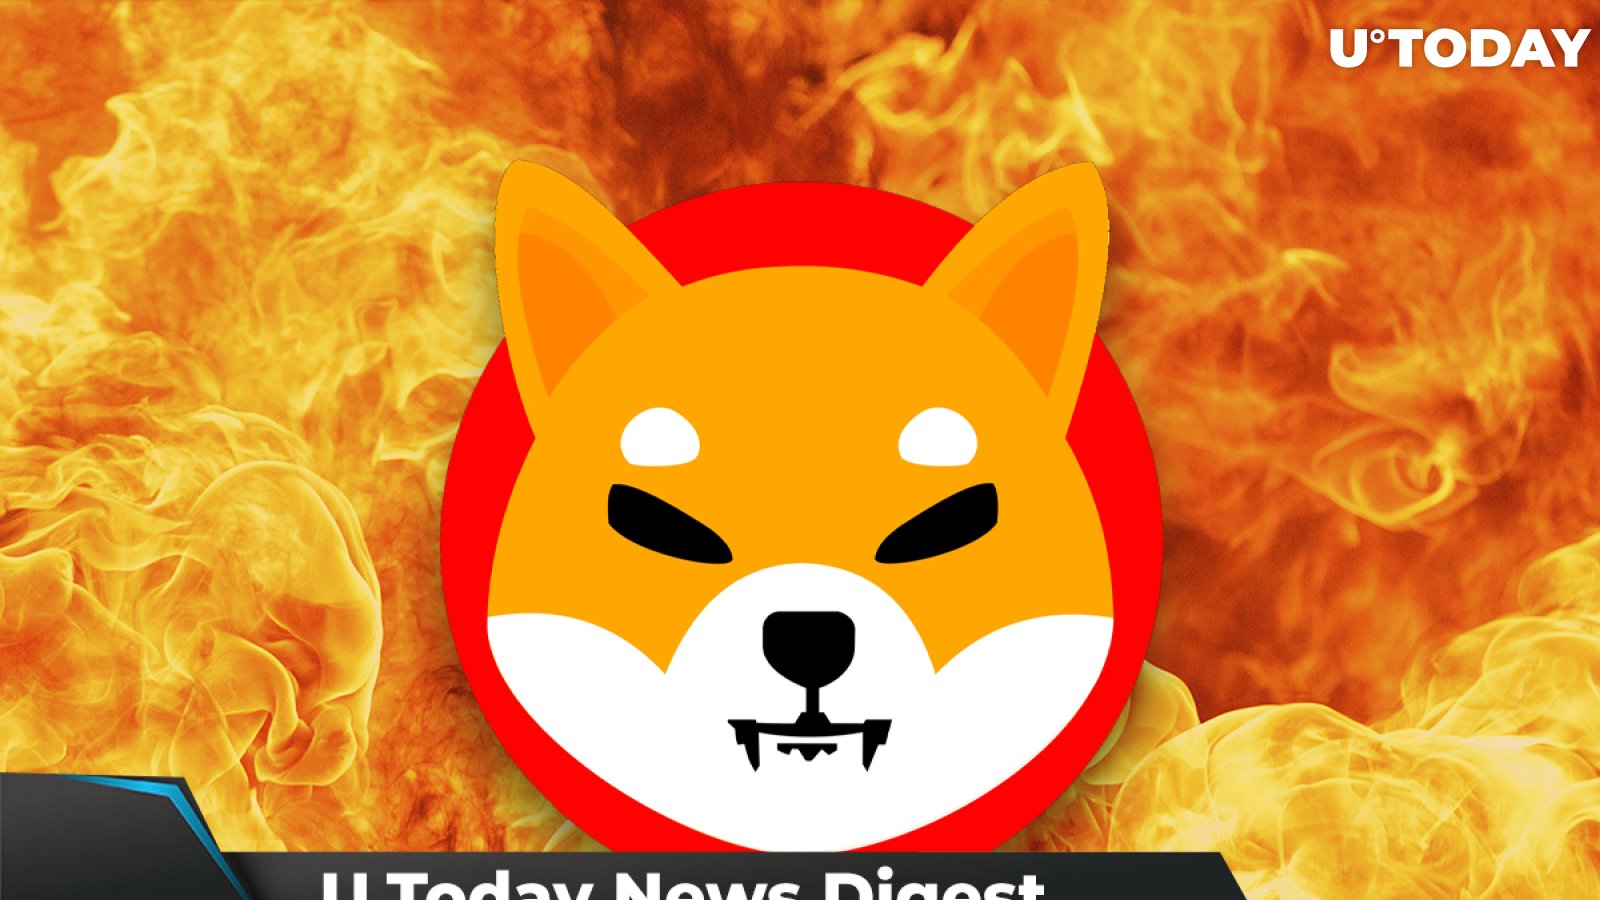 SHIB Flips DOGE, Makes Coinbase Crash, Surpasses Nissan and LG Electronics in Valuation: Shiba Inu News Digest by U.Today